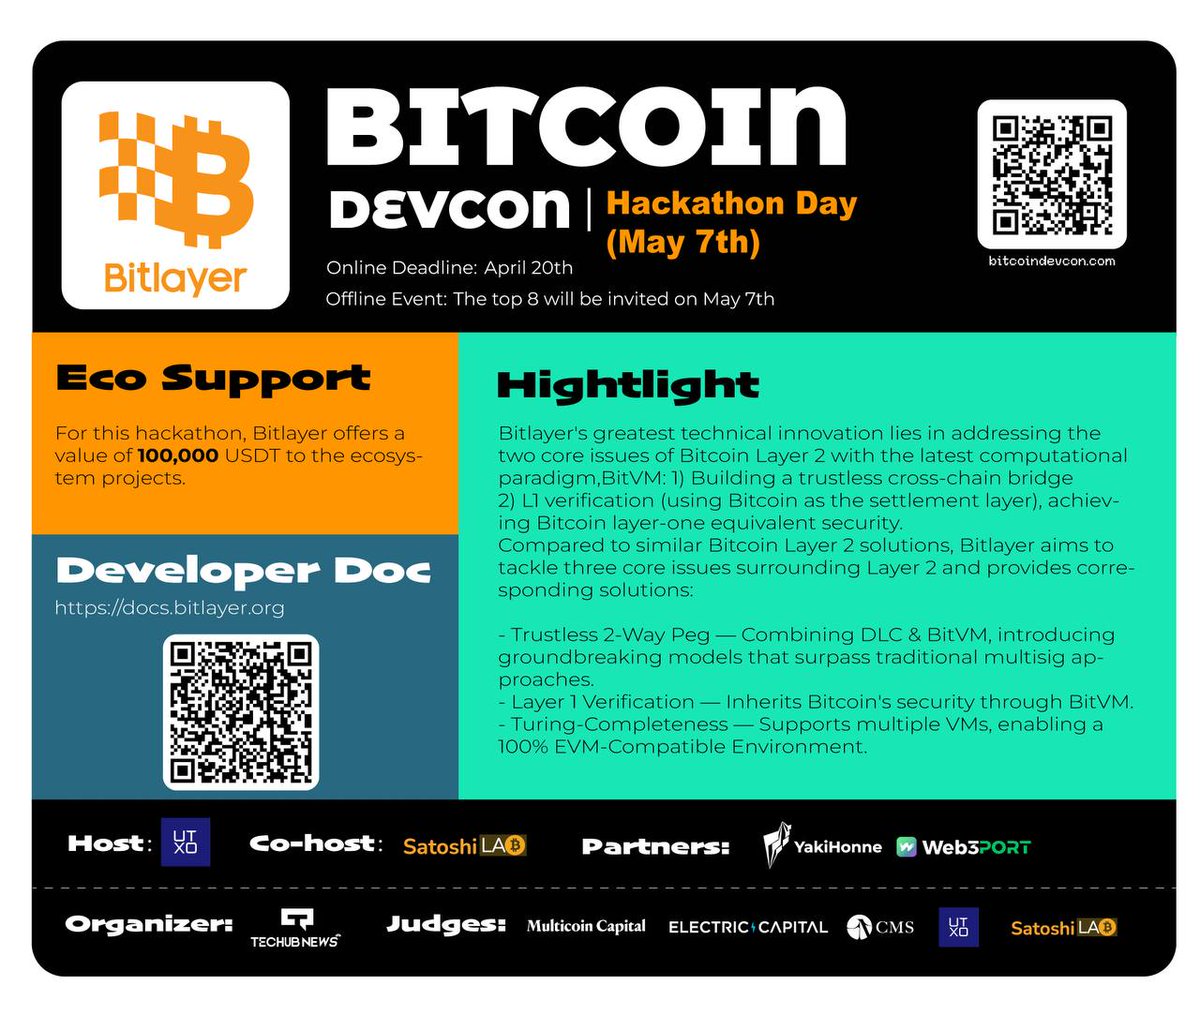 Bitlayer is proud to be the title sponsor of Bitcoin Asia's Devcon. We're excited to offer a total value of 100,000 USDT to ecosystem projects in this hackathon on May 7th. Join us as we fuel innovation and drive the future of Bitcoin!